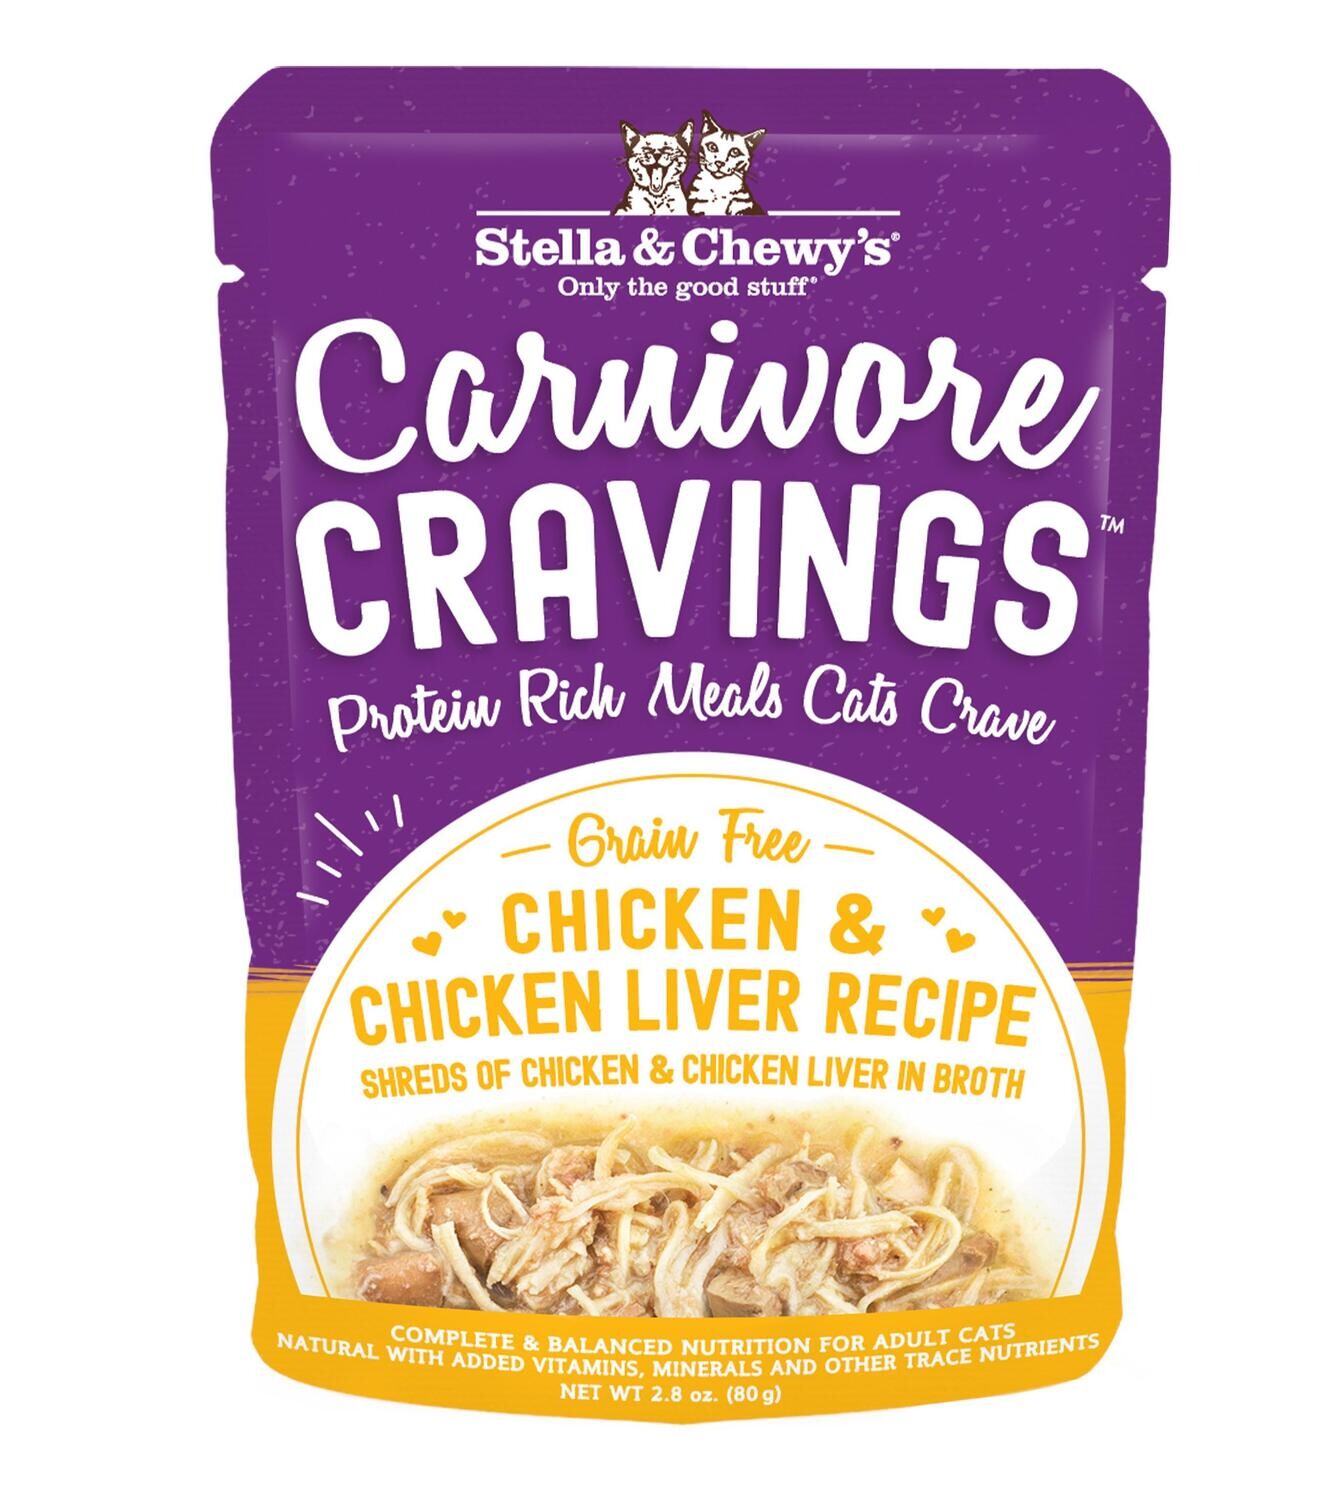 Stella & Chewy's Cat Carnivove Cravings Chicken Liver 2.8oz pouch 24/case